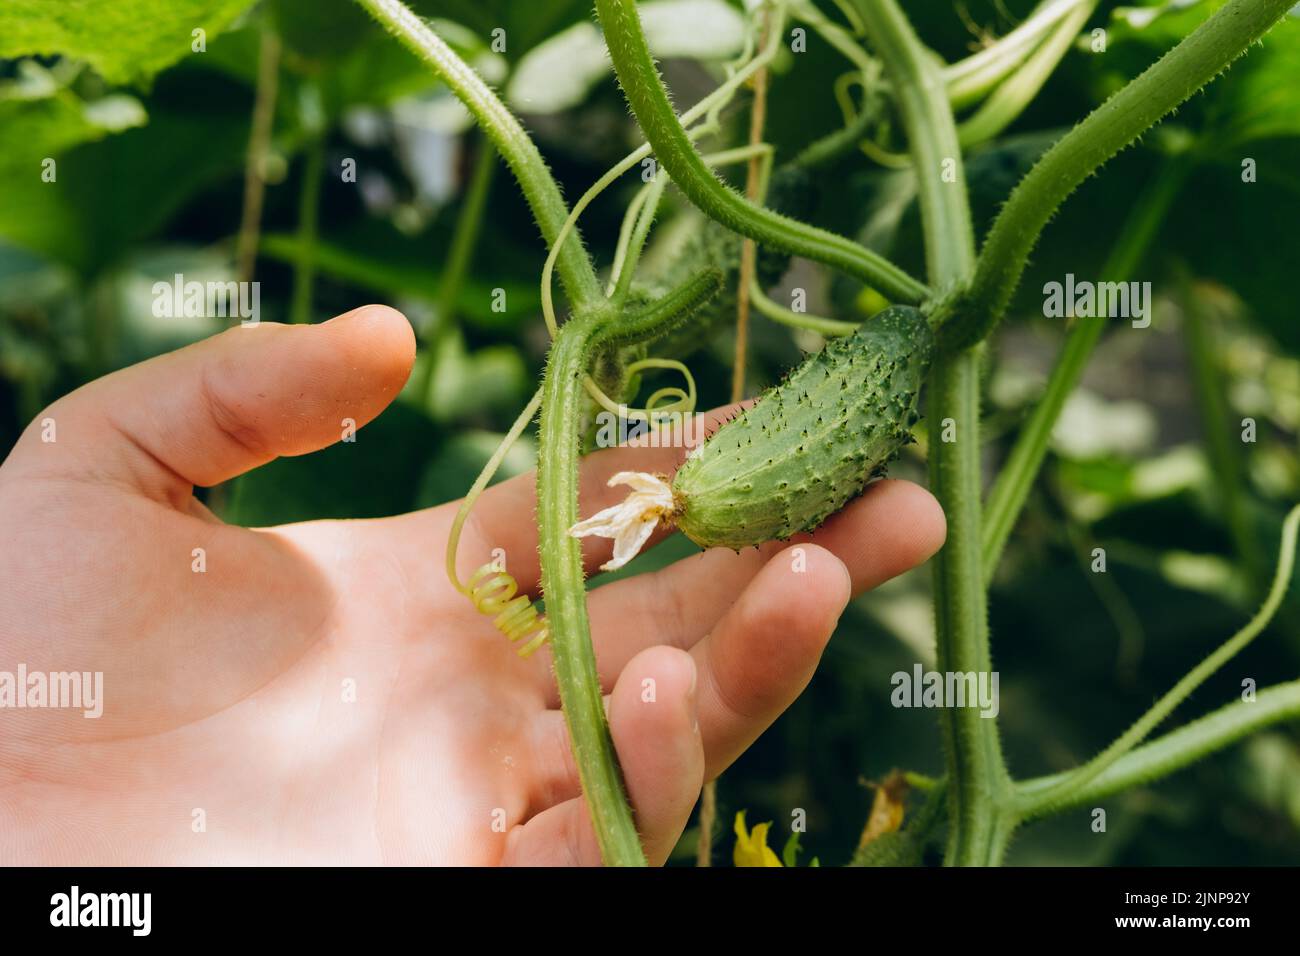 Hands holding small growing cucumber in urban home garden. Urban home gardening concept Stock Photo